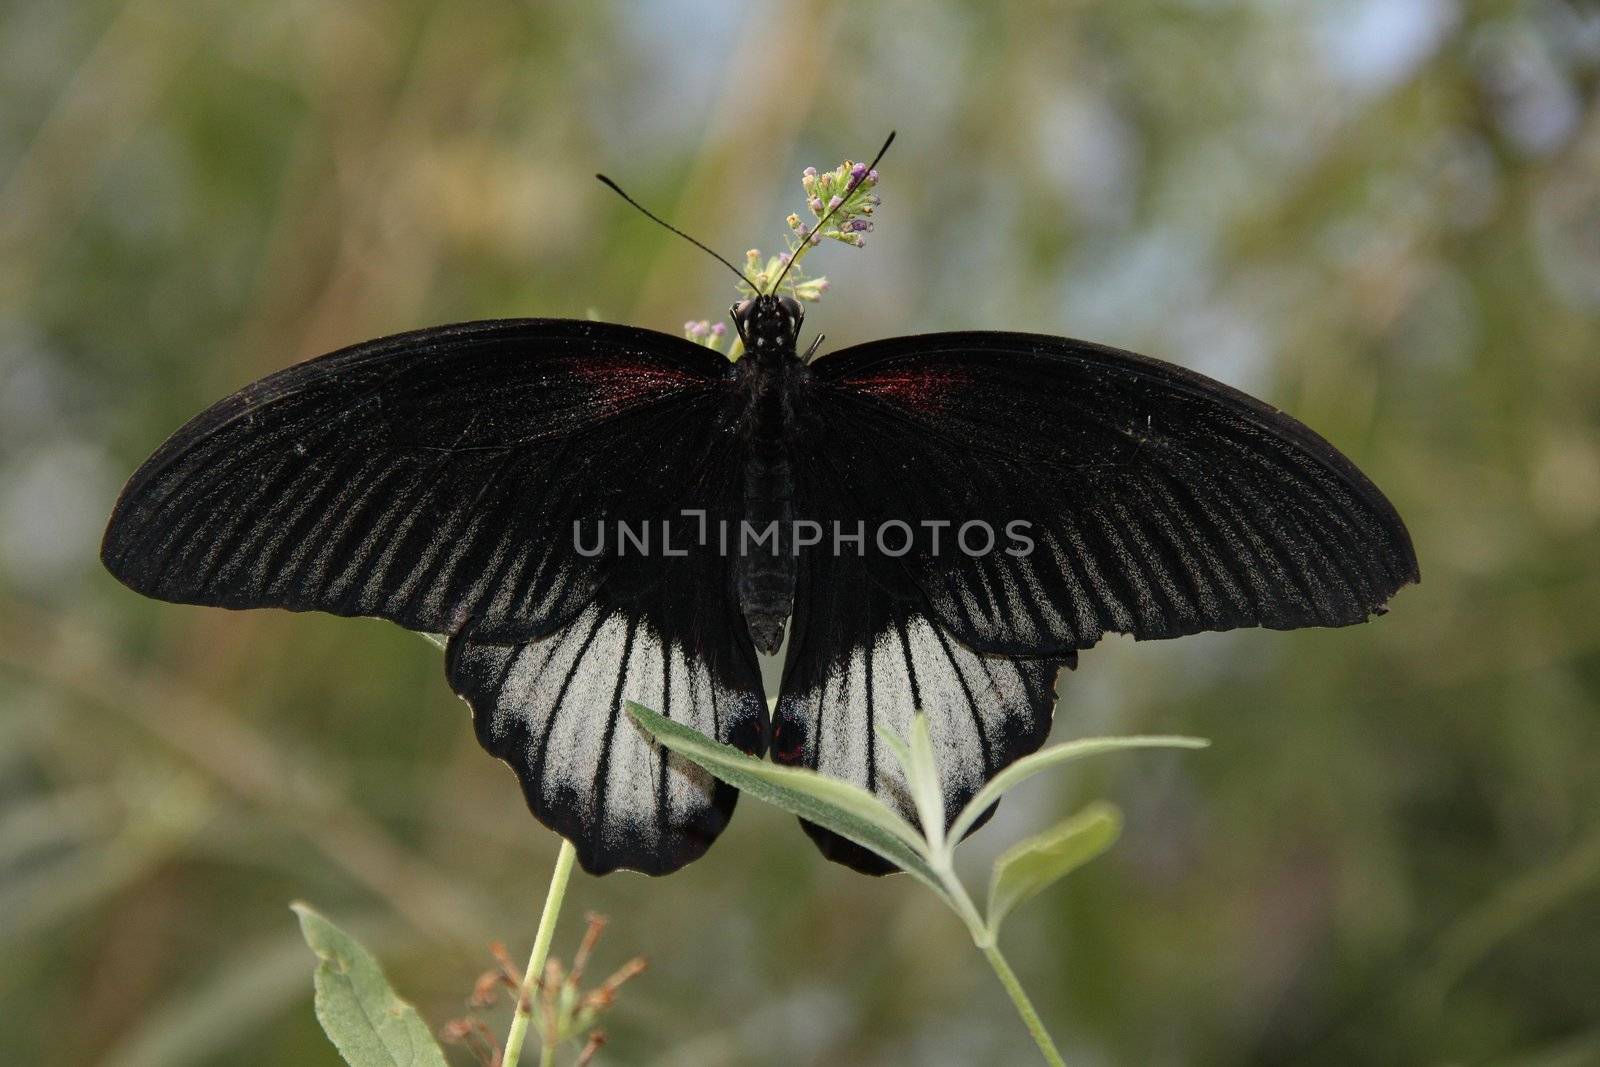 A beautiful black butterfly rests and feeds on a flower.